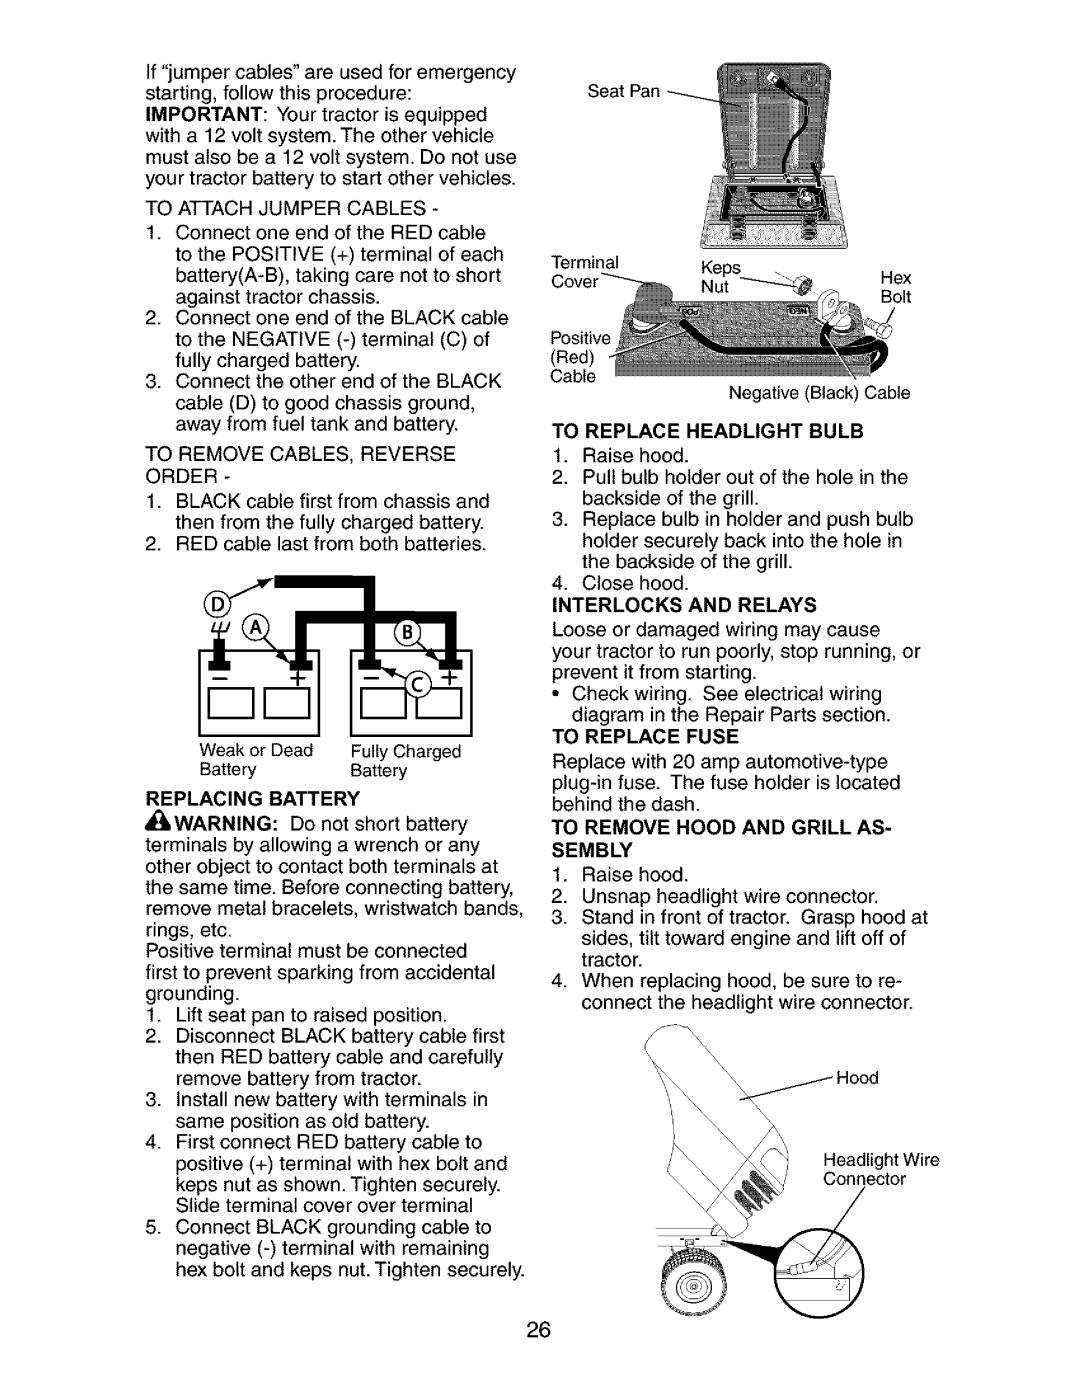 Craftsman 917.27316 owner manual To Attachjumpercables 